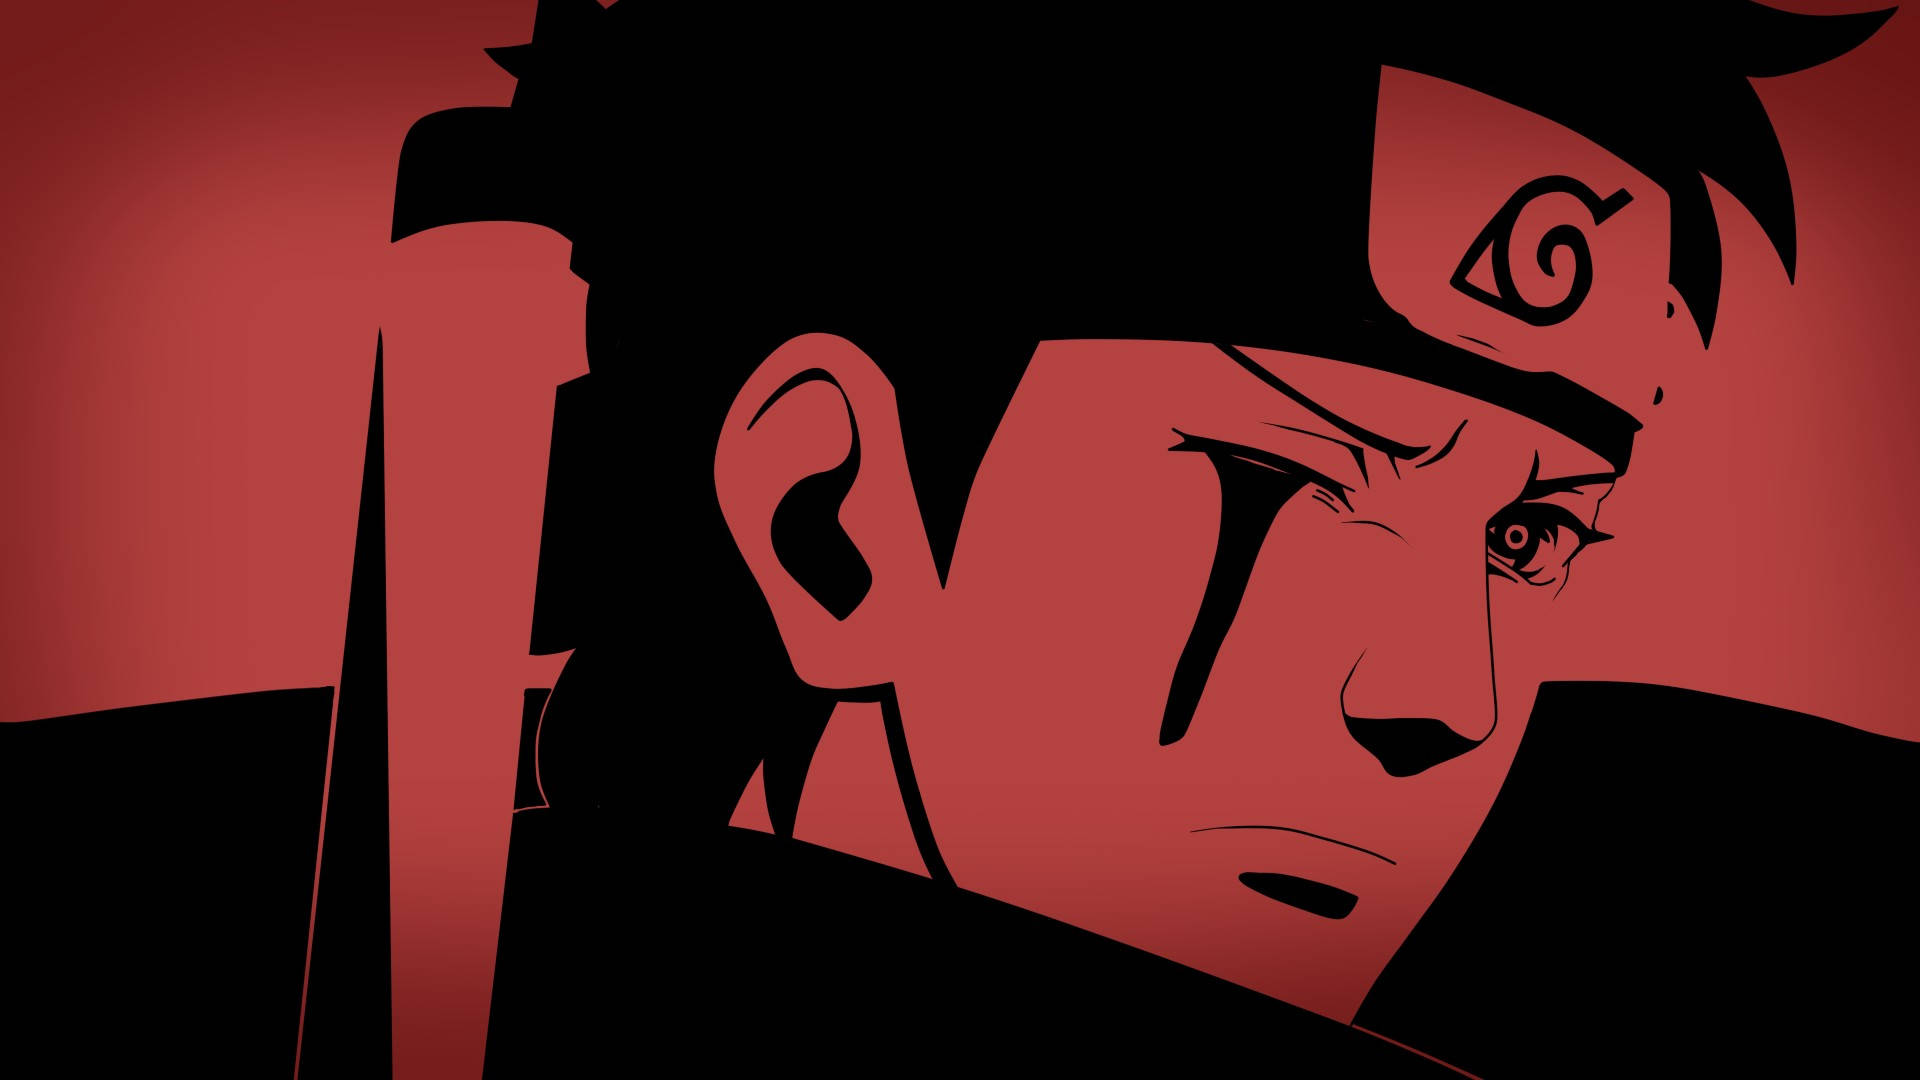 Majestic Illustration Of Shisui In Vibrant Red And Black